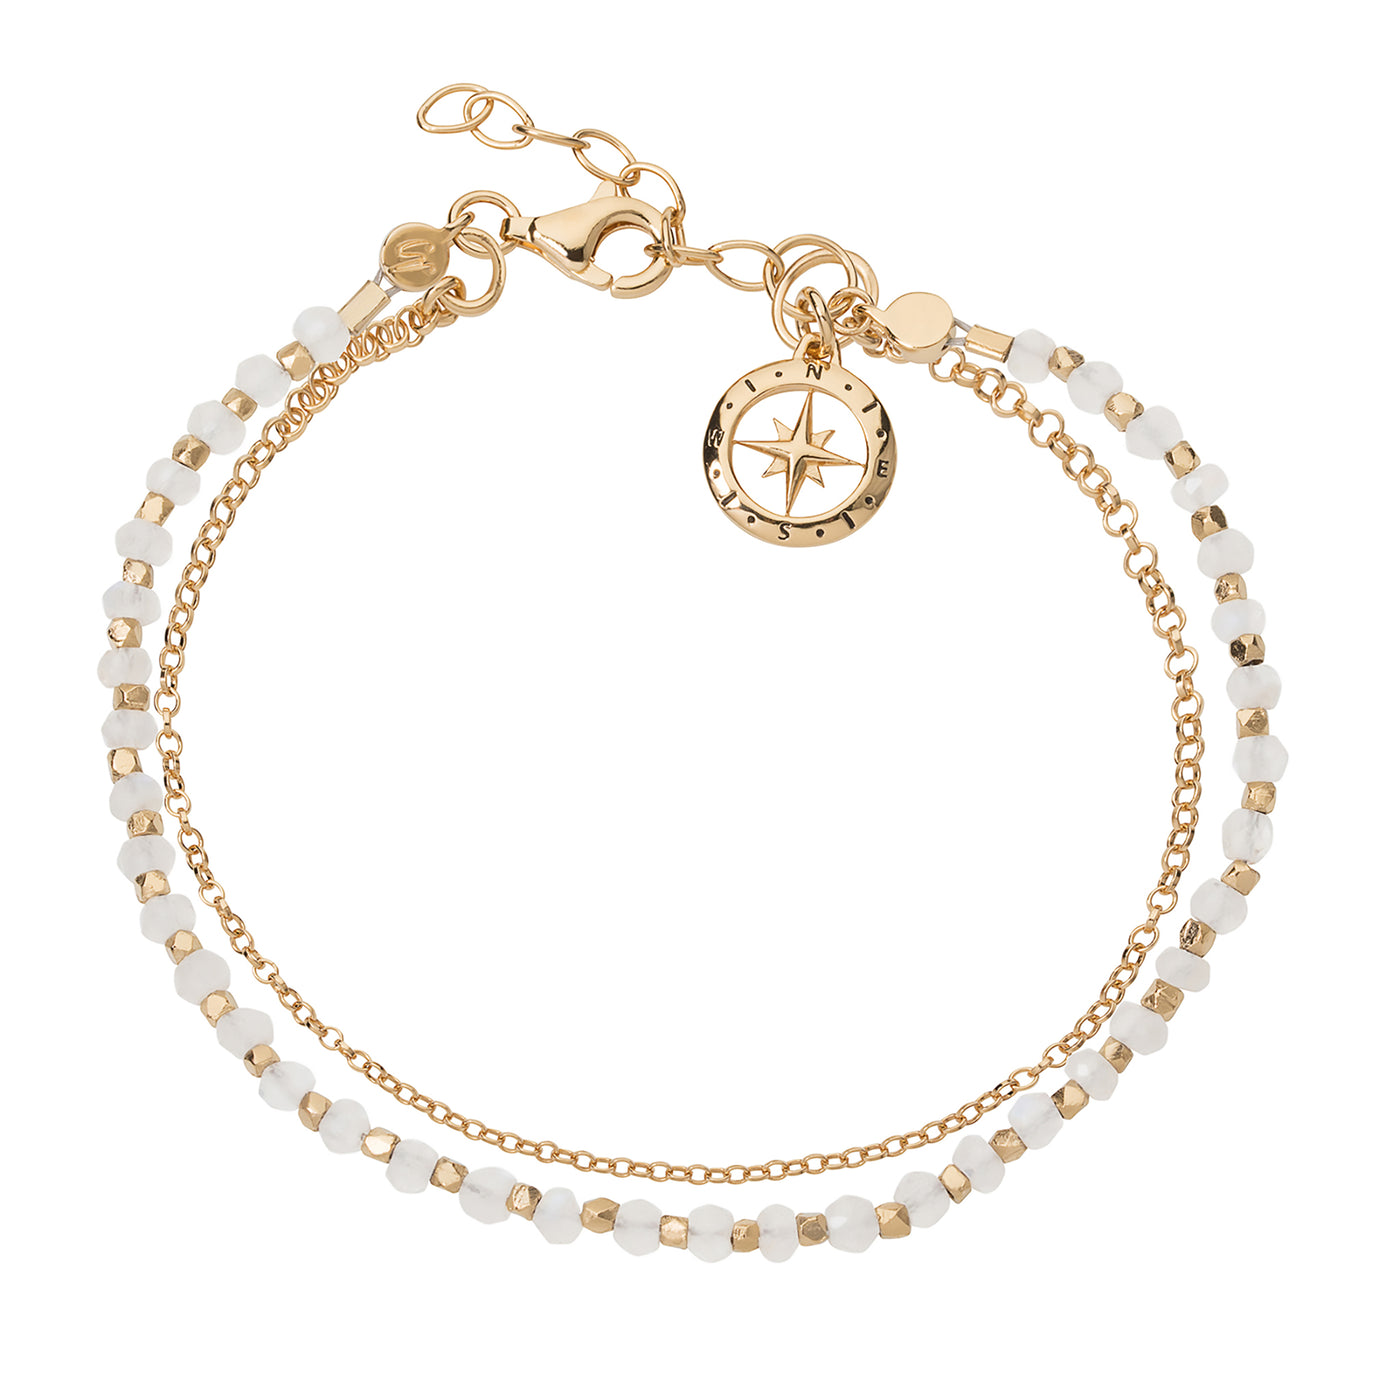 Photo of Friendship Bracelet in Gold with Moonstone